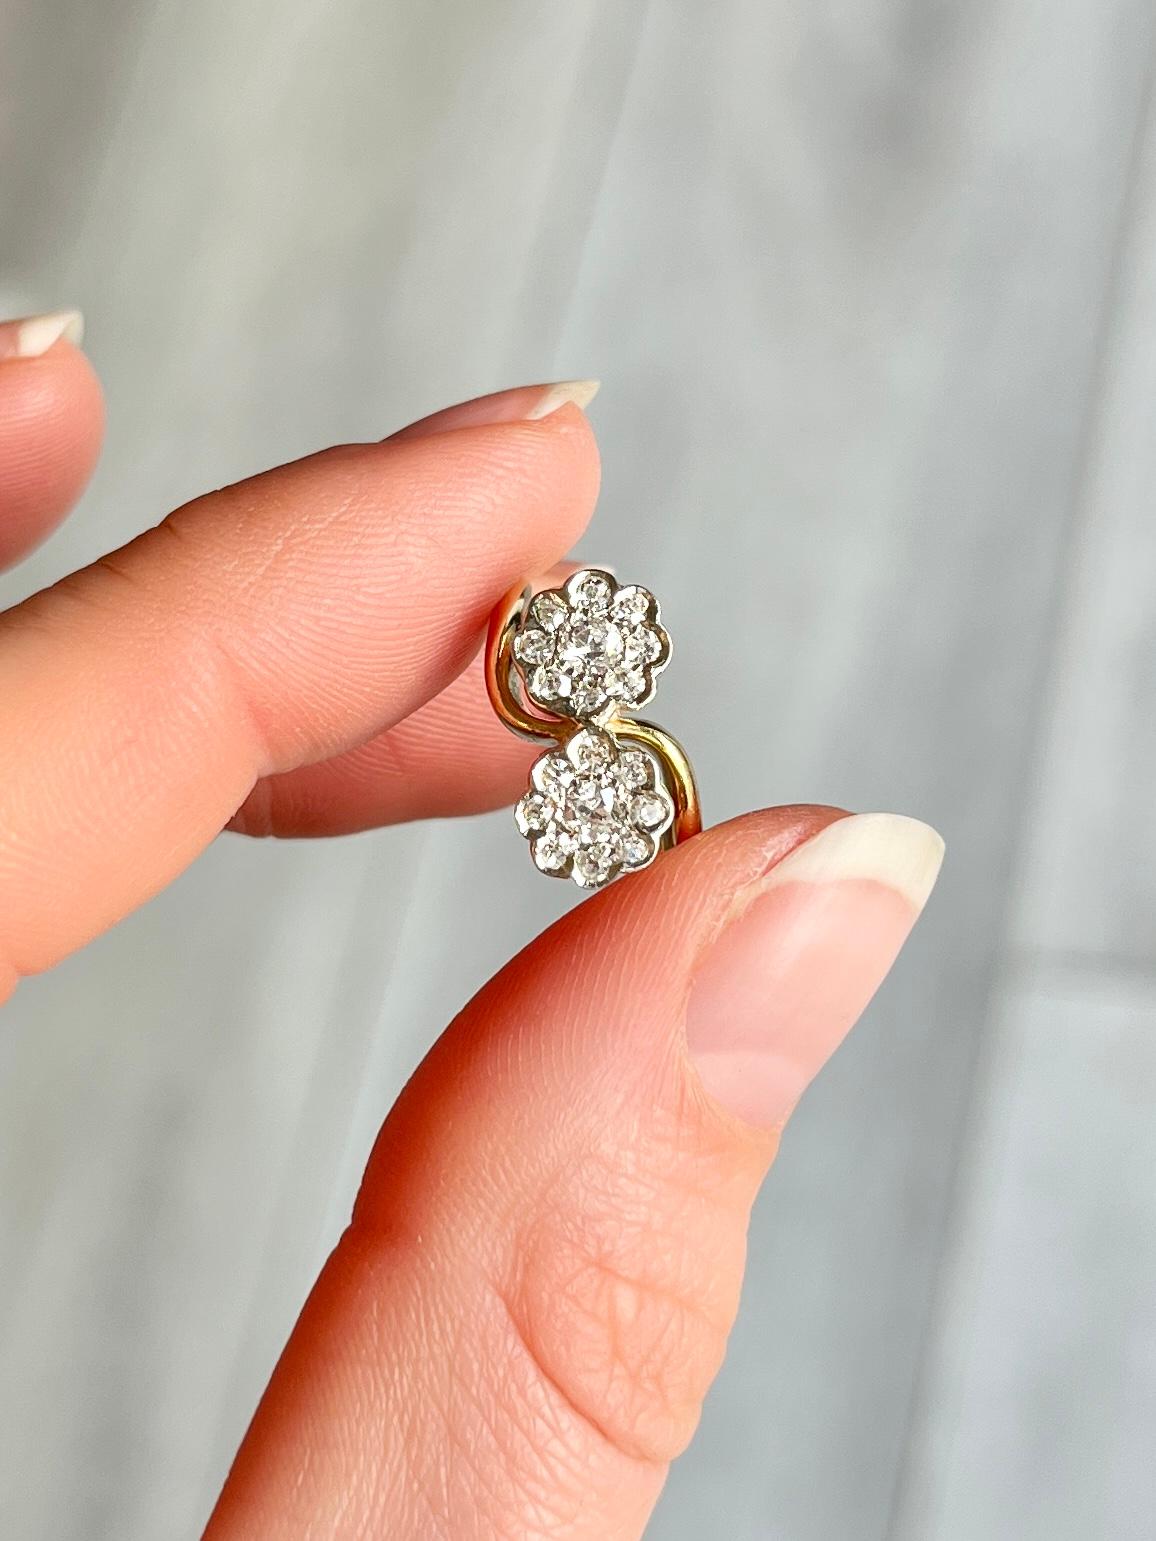 This wonderful double diamond cluster holds sparkling diamonds totalling 34pts per cluster. The clusters are wonderfully twisted and the ring is modelled in 18ct gold and the stones set in platinum. 

Ring Size: H 1/2 or 4 
Widest Point: 12mm